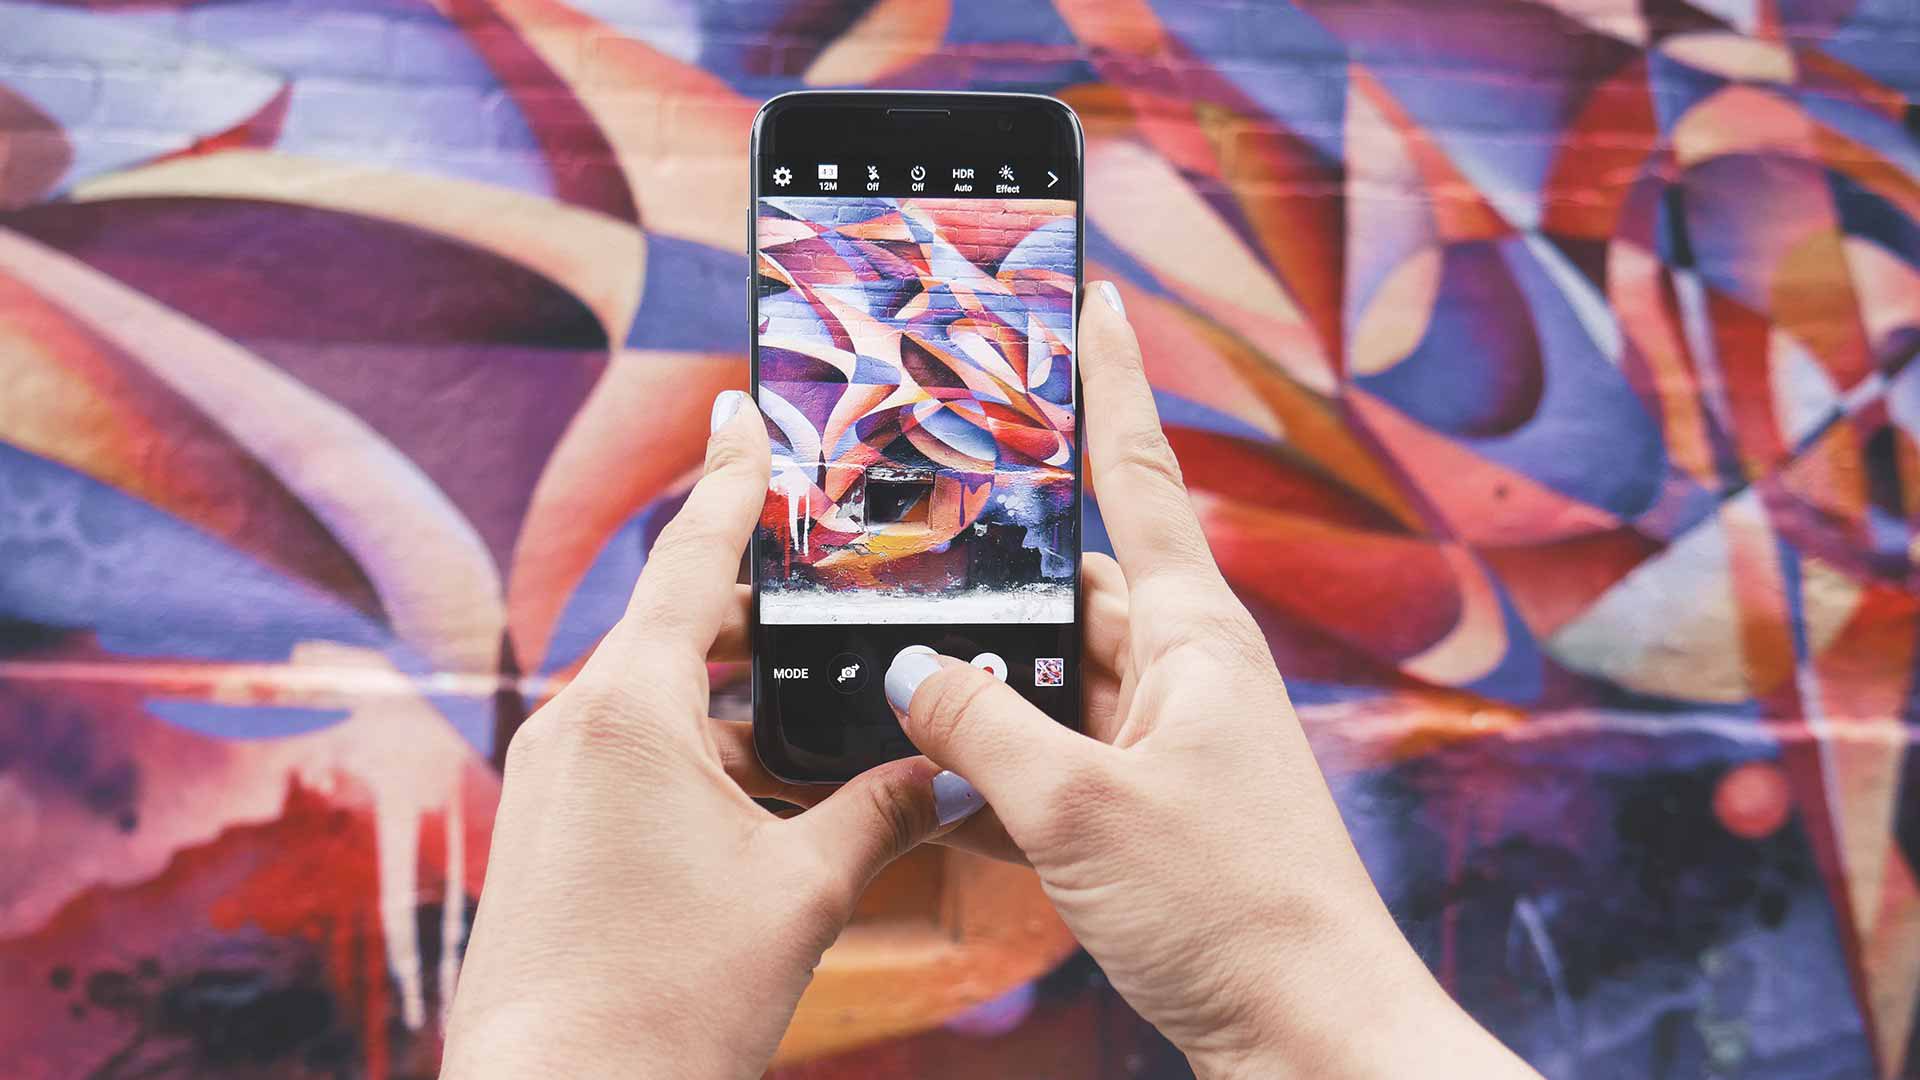 Smartphone shooting video of stylised graffiti - Short film ideas for iPhone filmmakers